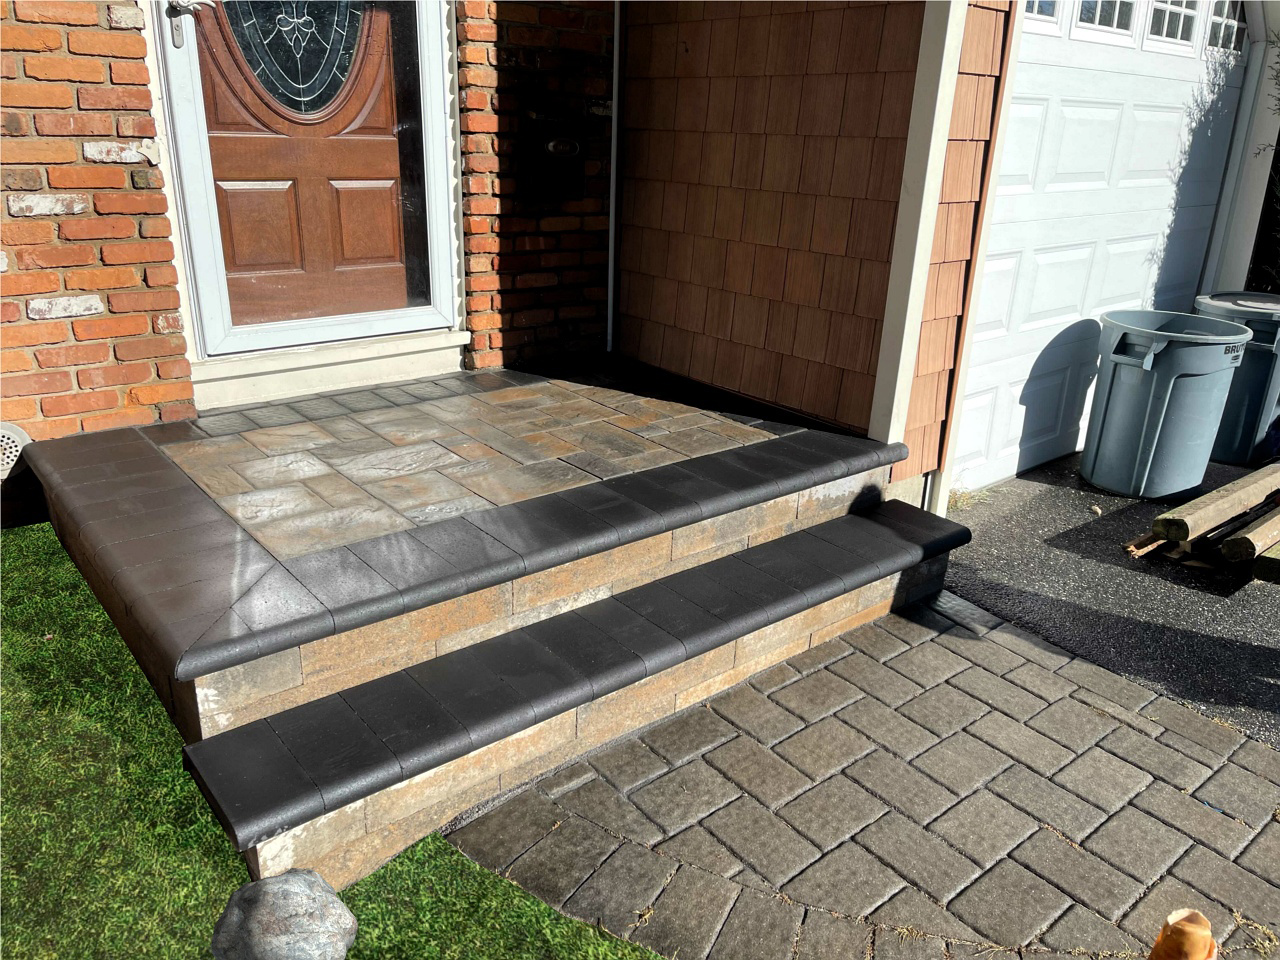 Weather-resistant and long-lasting natural stone steps for worry-free use